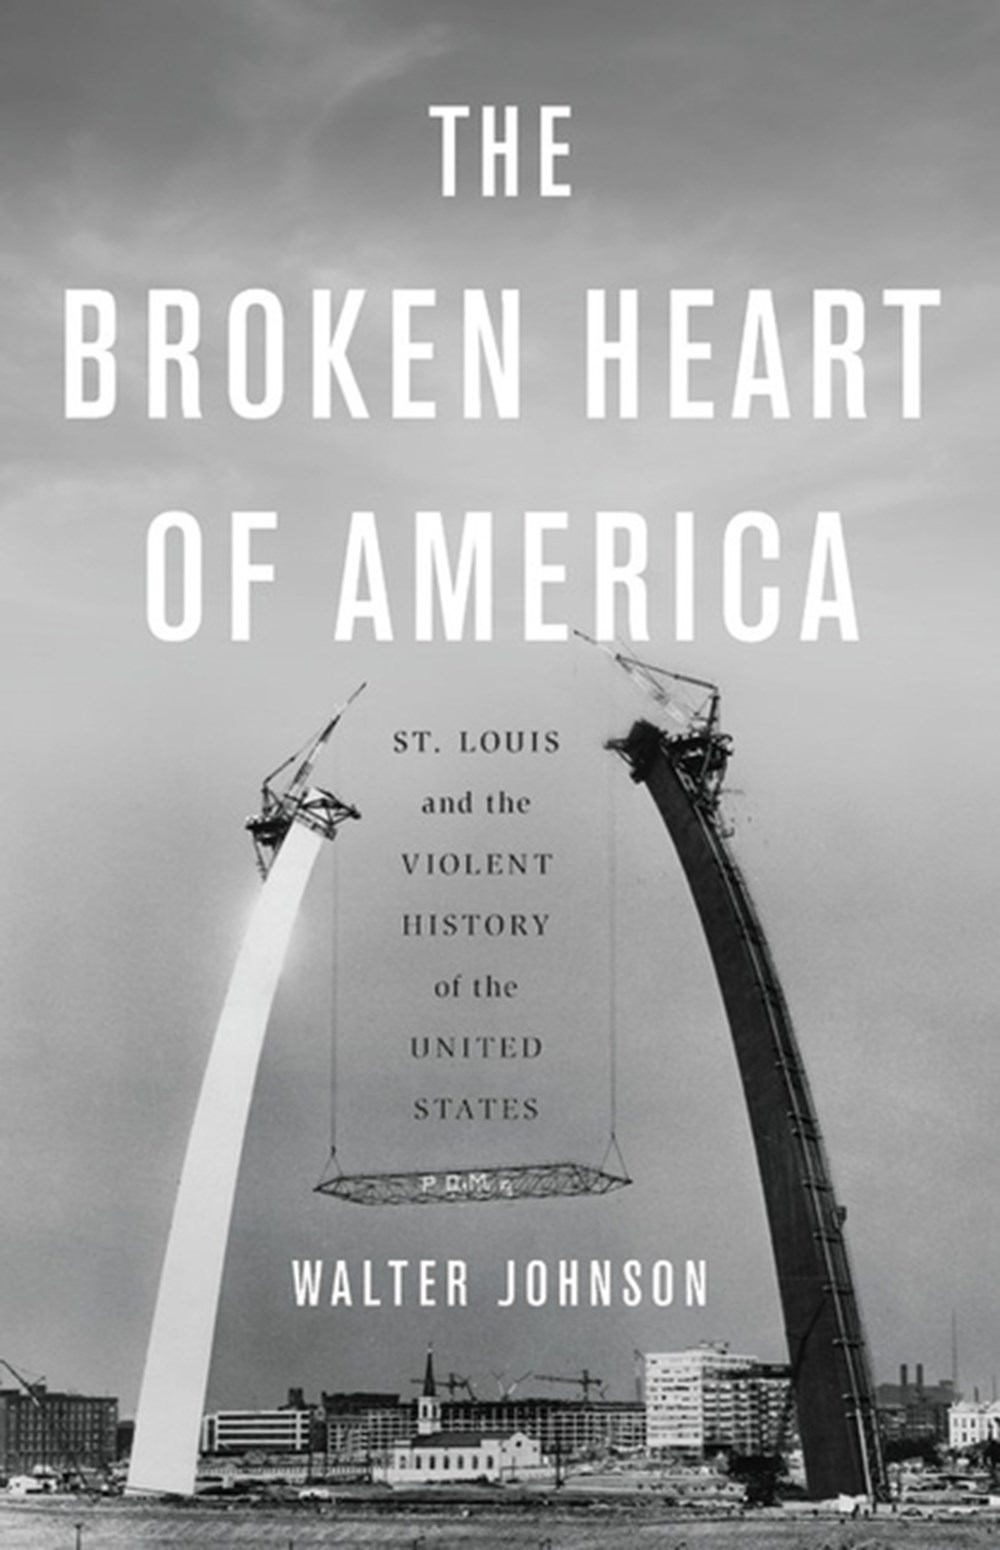 Broken Heart of America St. Louis and the Violent History of the United States